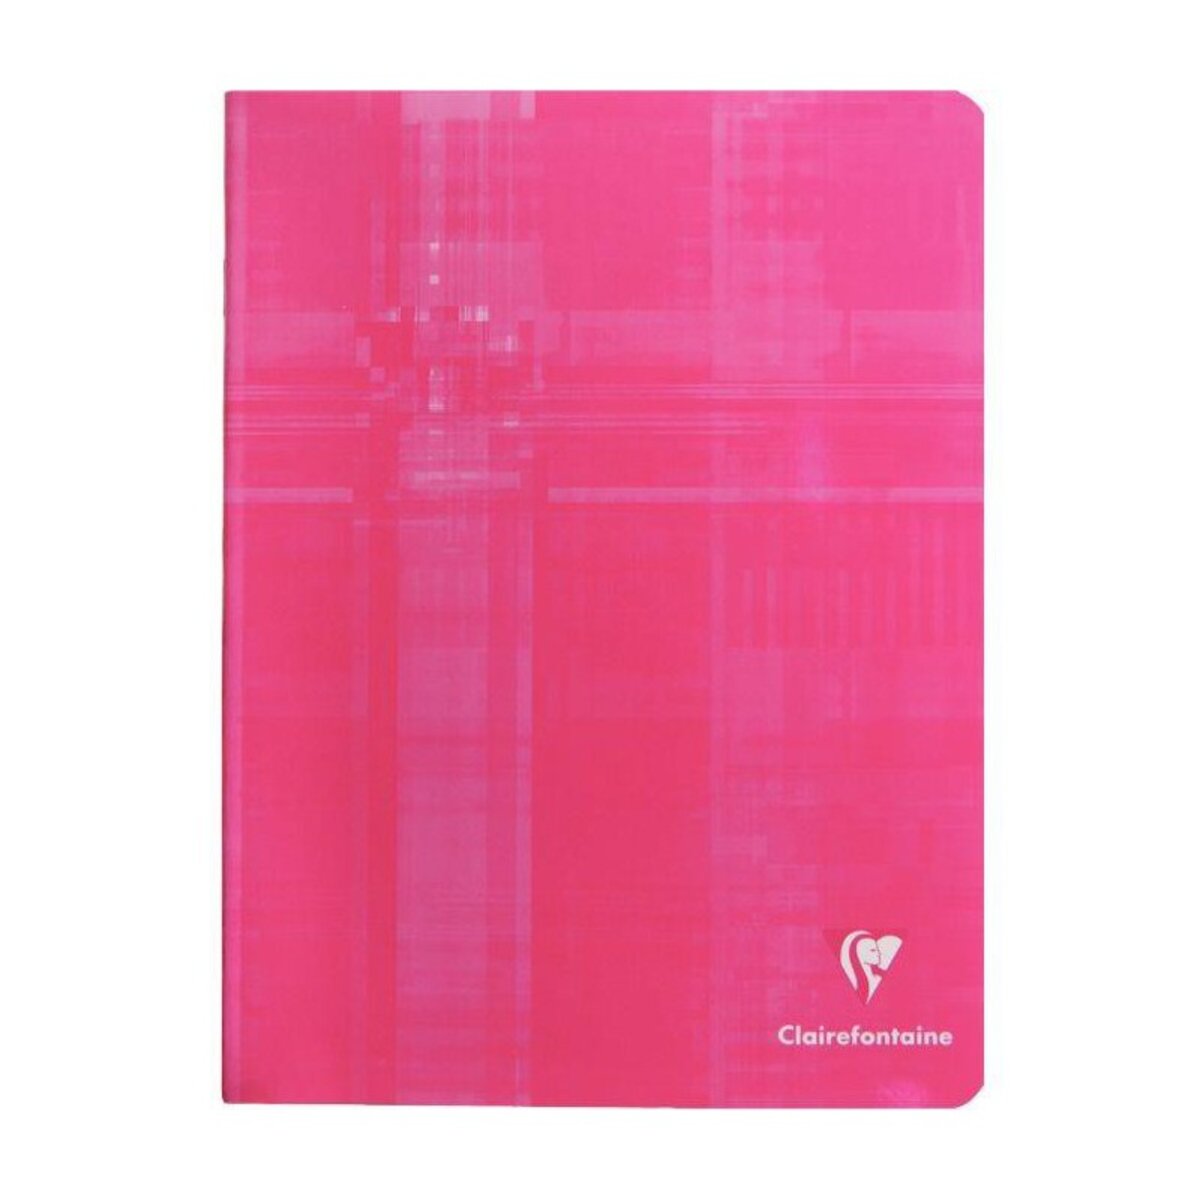 Clairefontaine 1 Cahier piqûre, 170 x 220 mm, 96 pages, 5x5